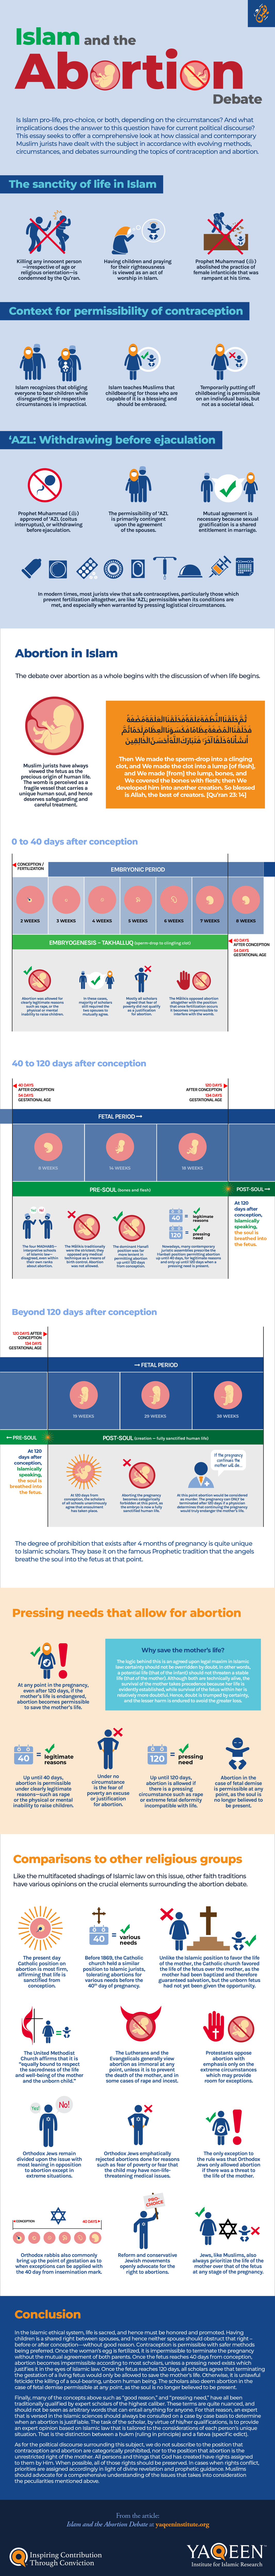 infographic-abortion